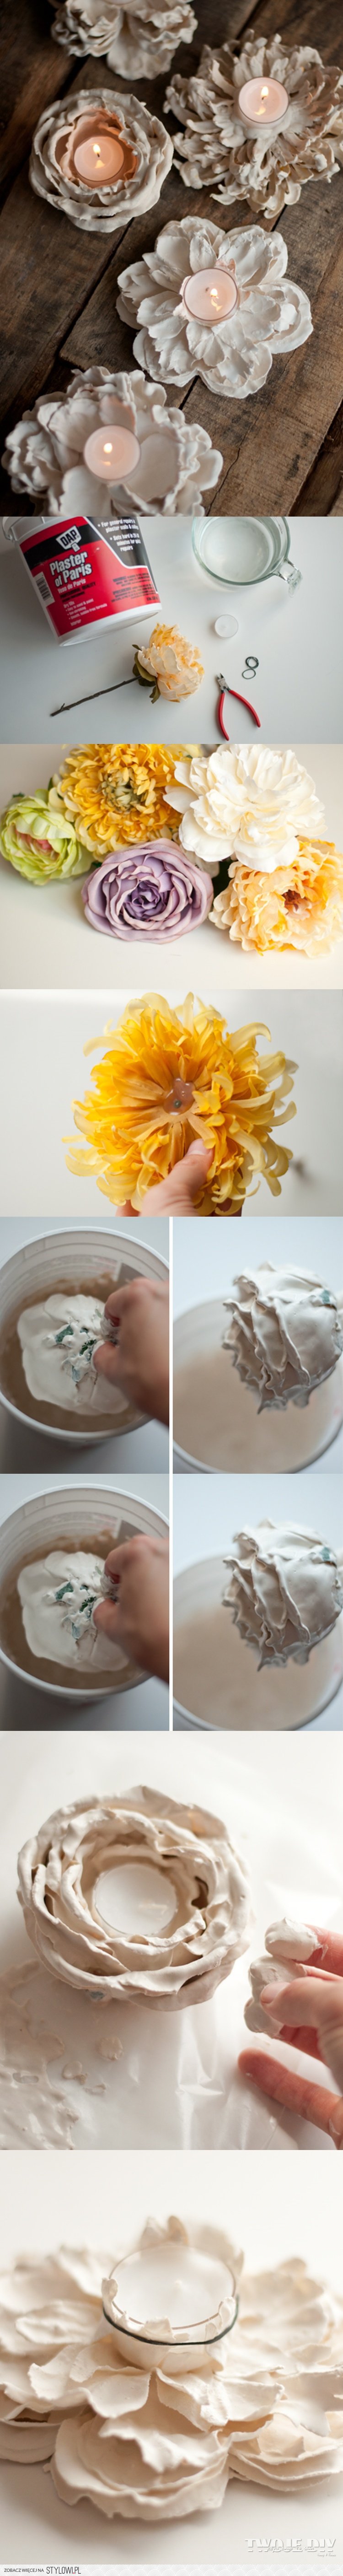 DIY Romantic Plaster Dipped Flower Votives. I can't believe how easy it is to make these beautiful flower votives at home. Tutorial via 